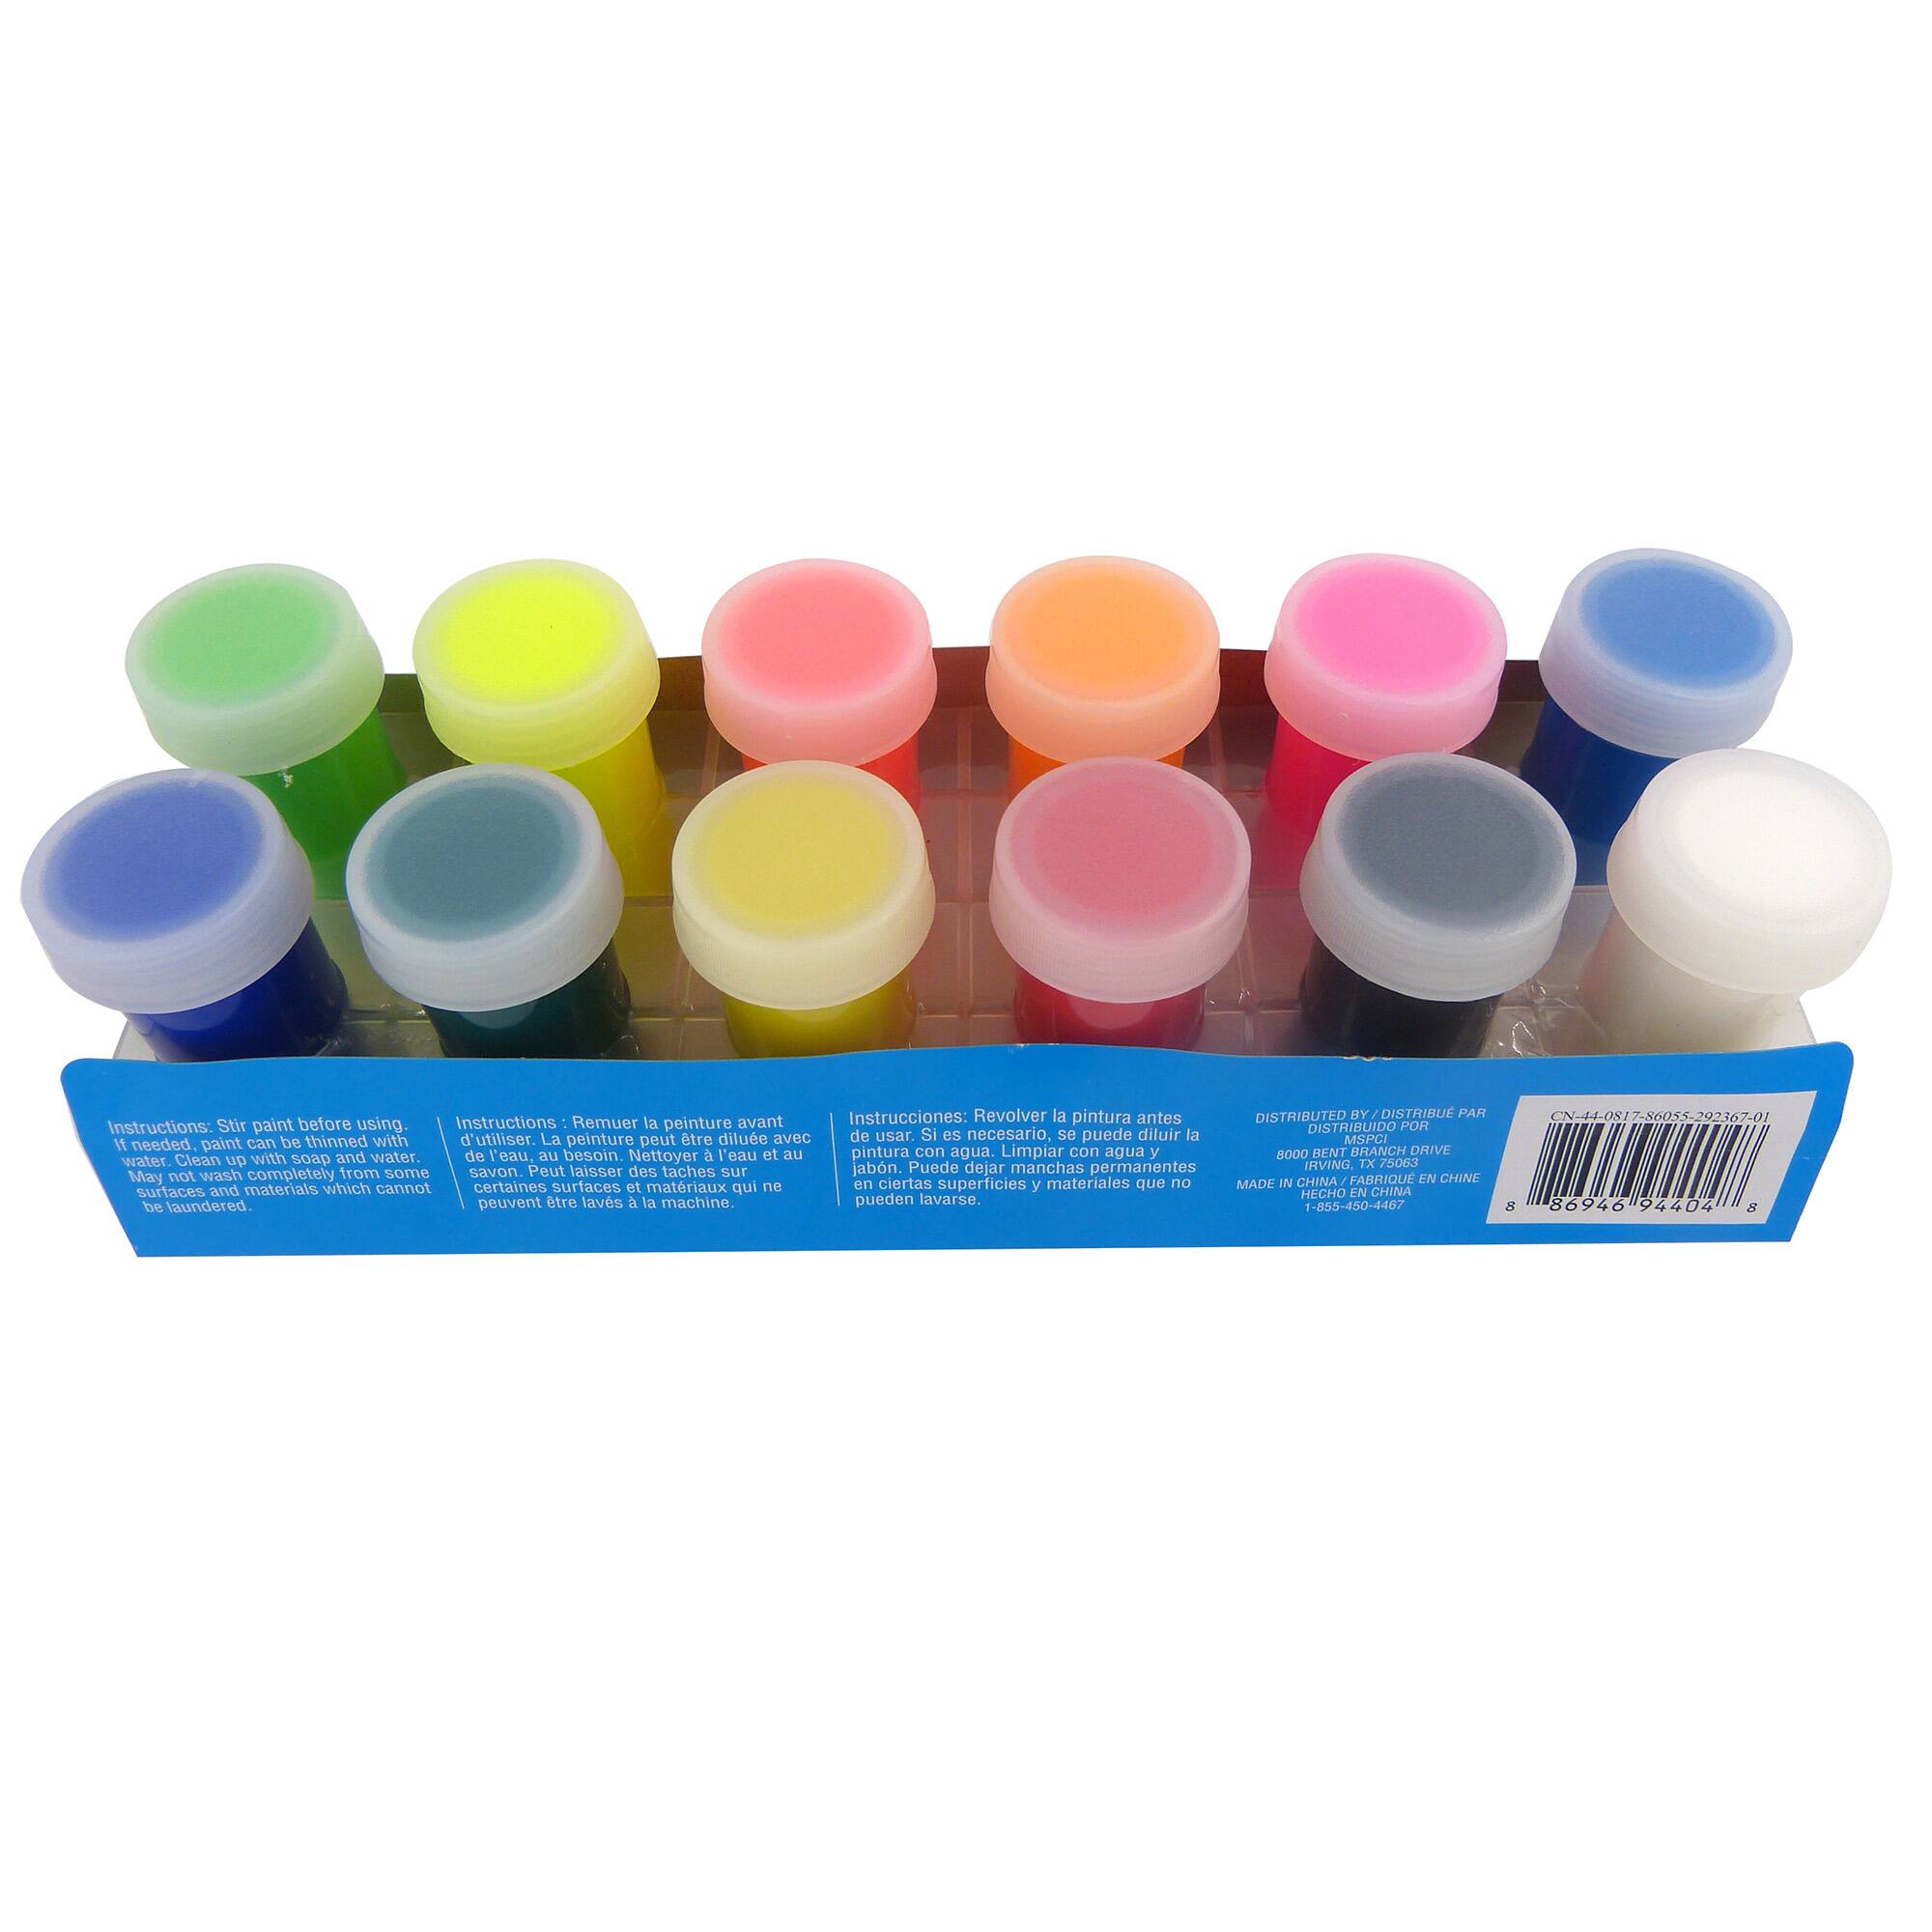 Find Neon & Primary Washable Paint Set by Creatology™ at Michaels